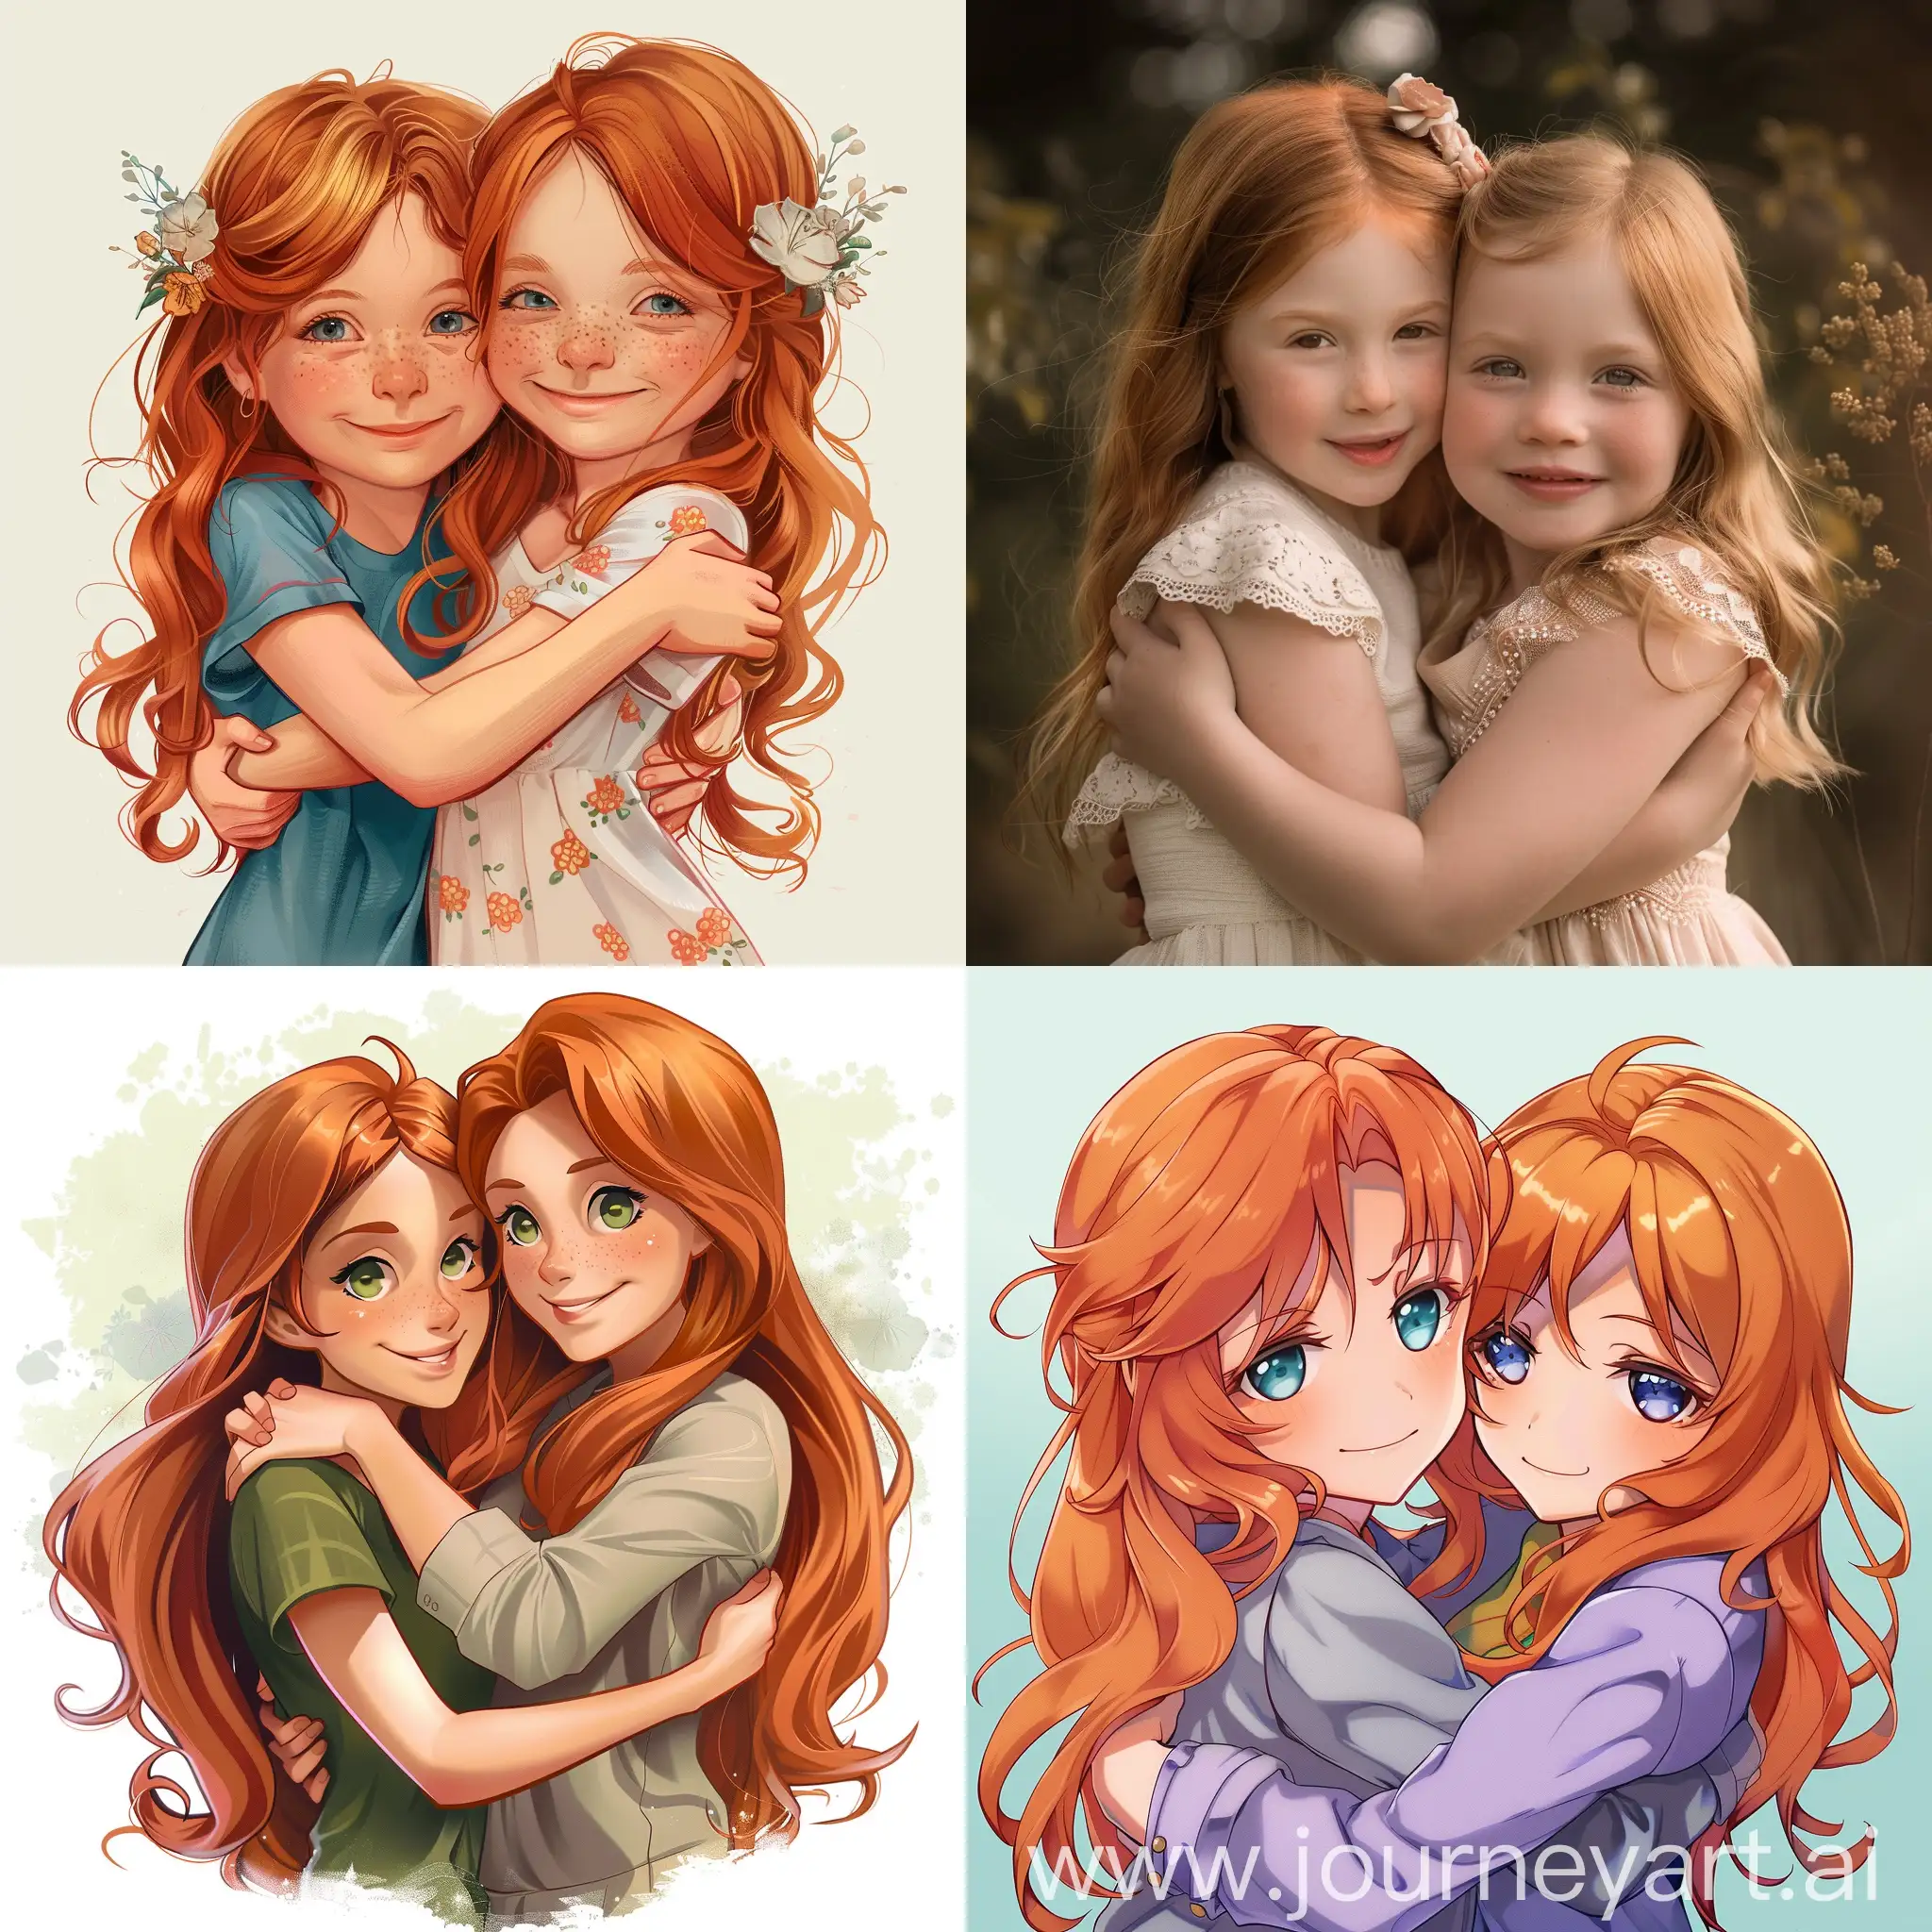 Adorable-Redheaded-Sisters-Embracing-in-Affectionate-Gesture